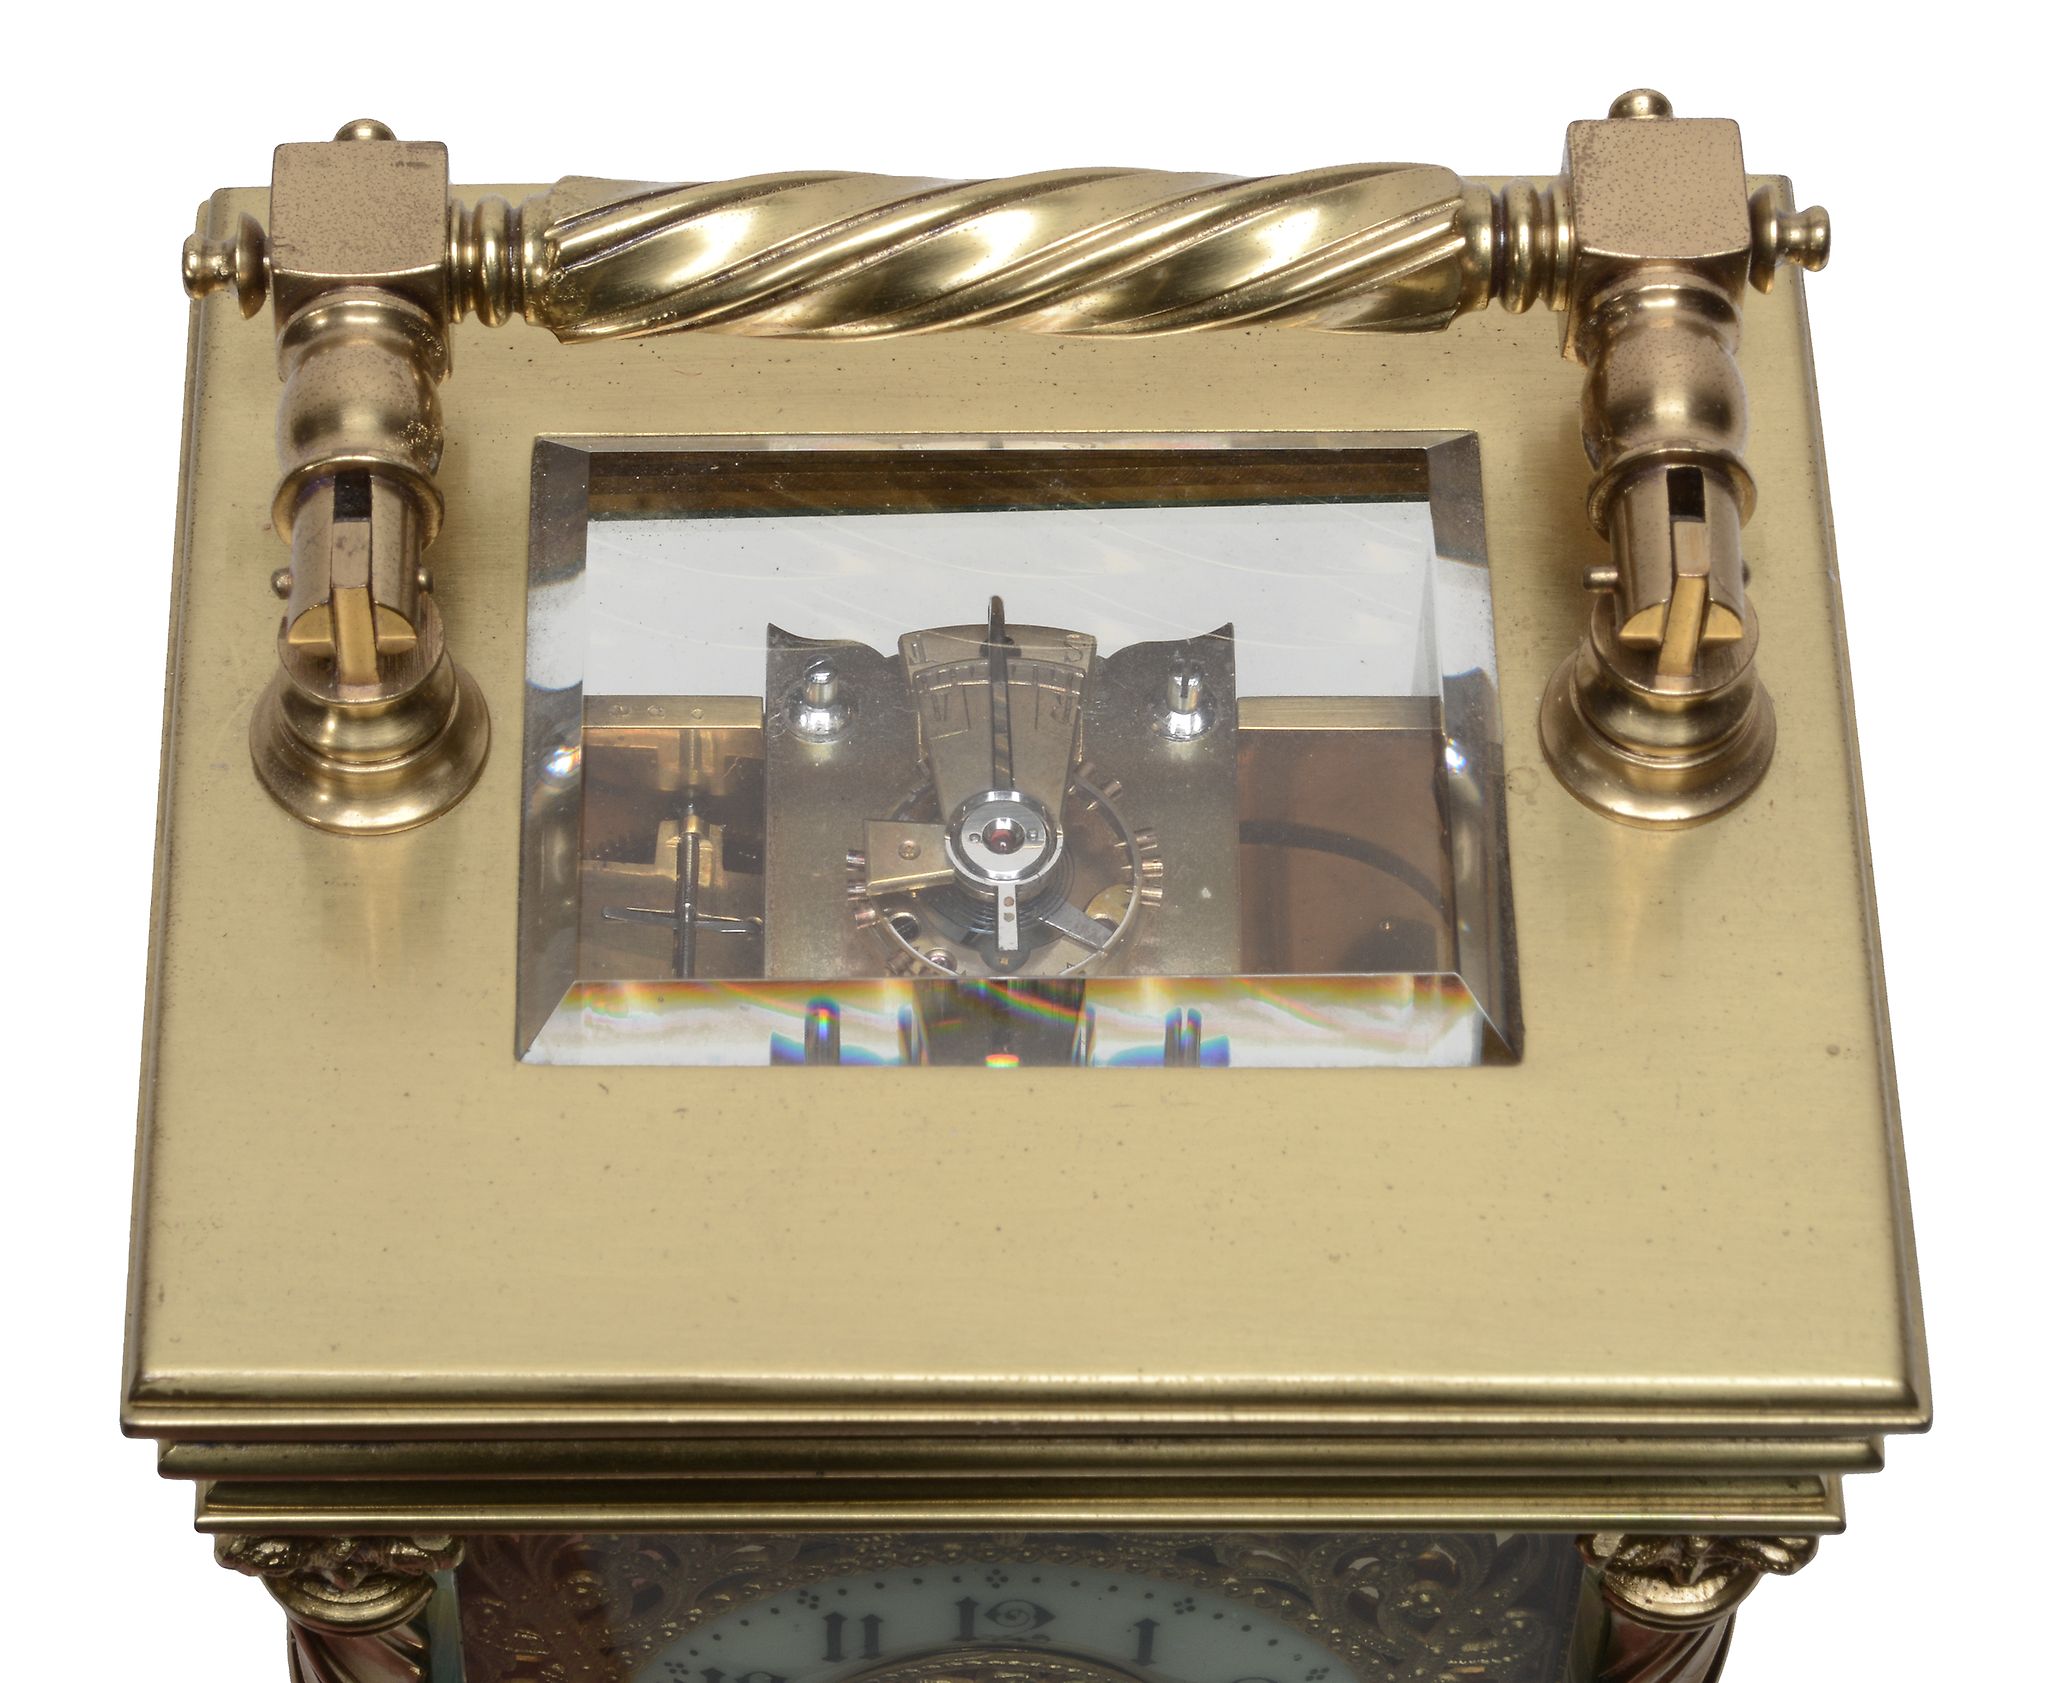 A French lacquered brass carriage clock, Richard and Company, Paris - Image 3 of 3